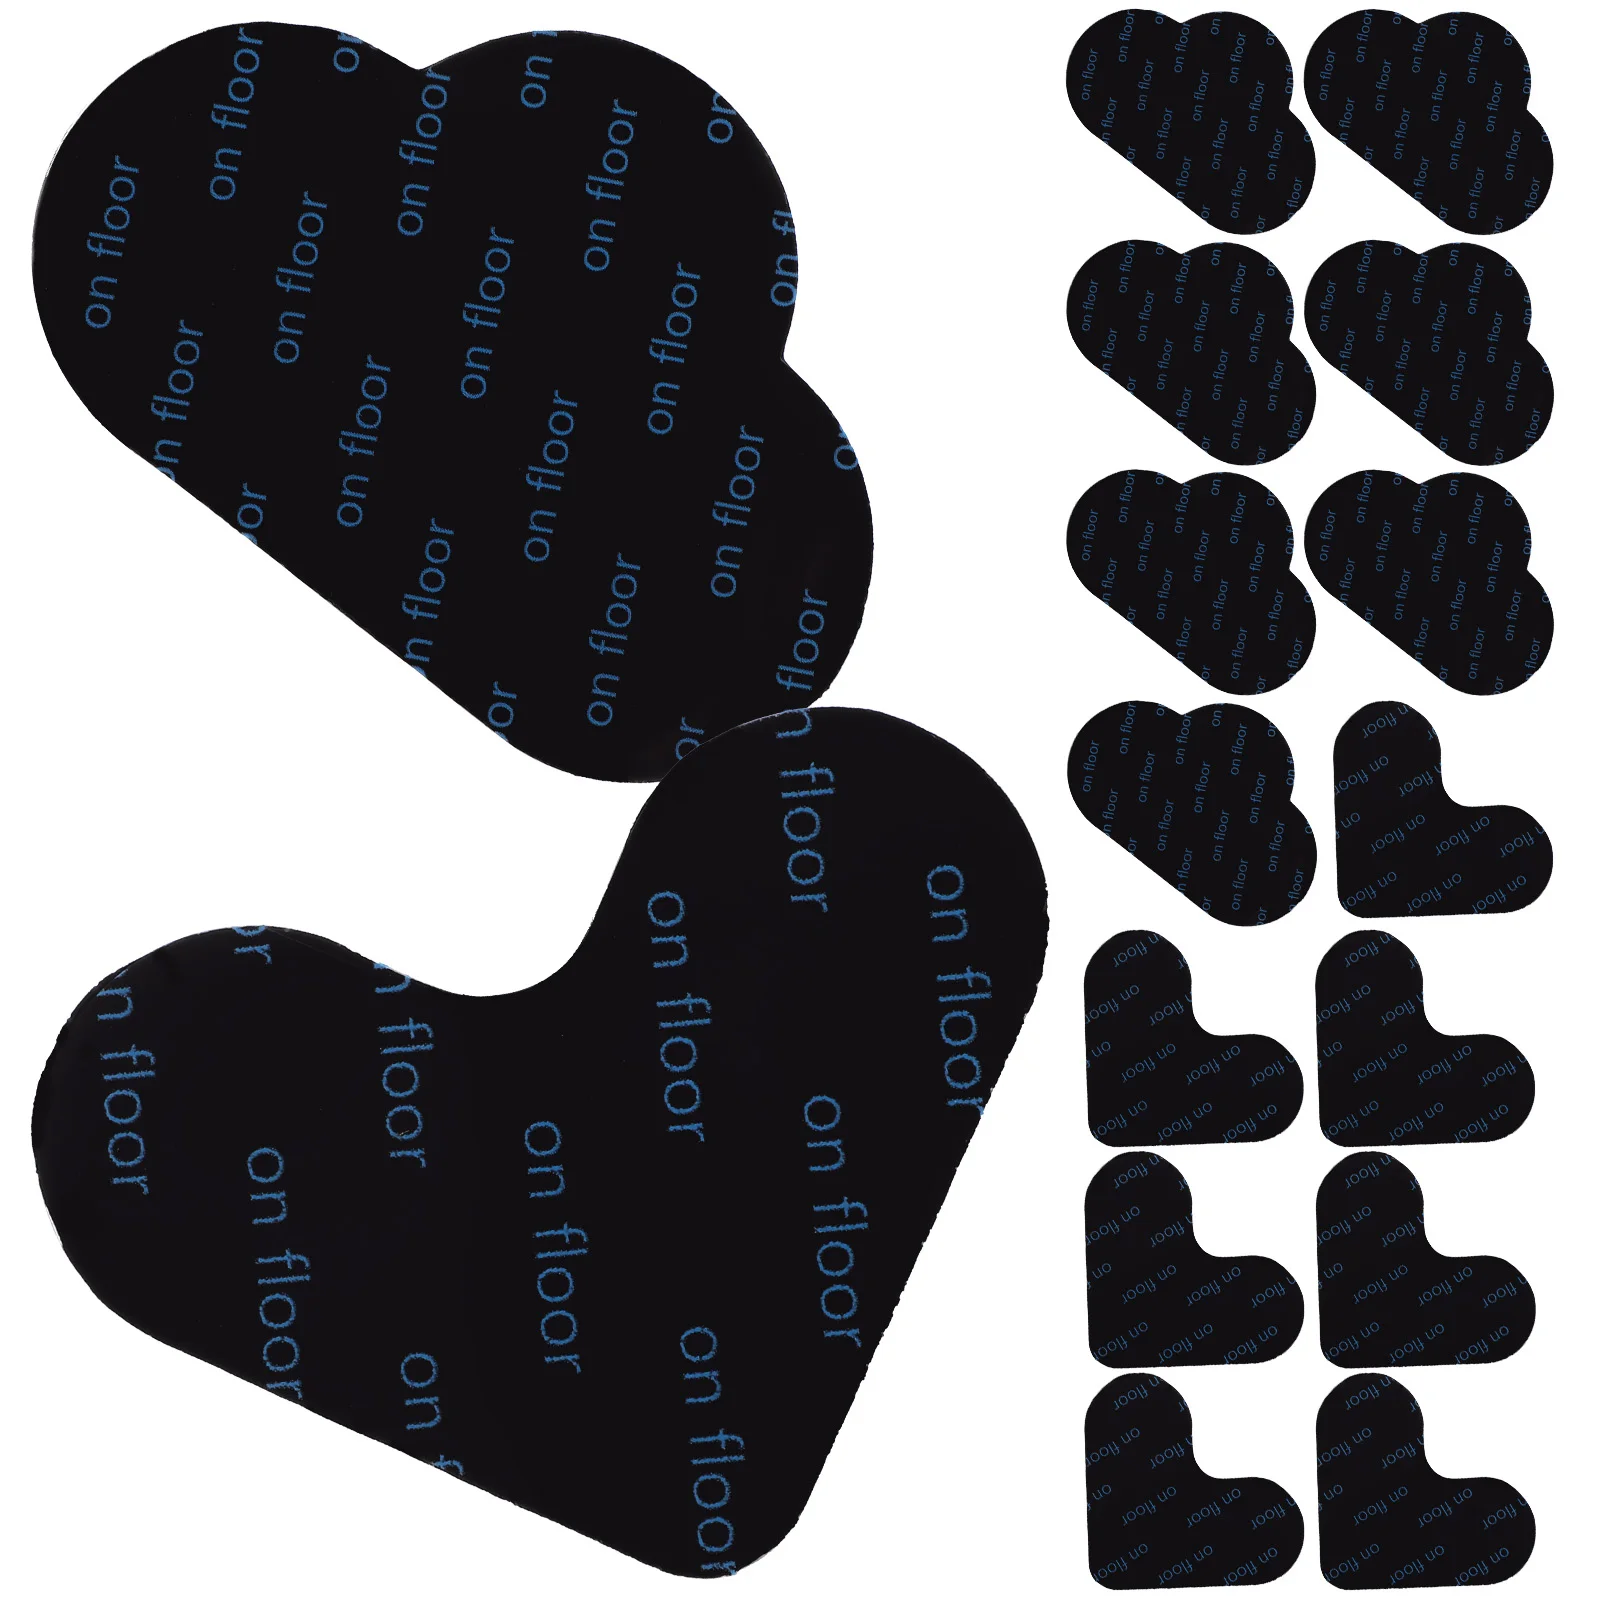 

16 Pcs Rug Grippers Heart and Cloud Shape Rug Pads Rug Tape Stickers for Hardwood Floors Tiles Area Rugs